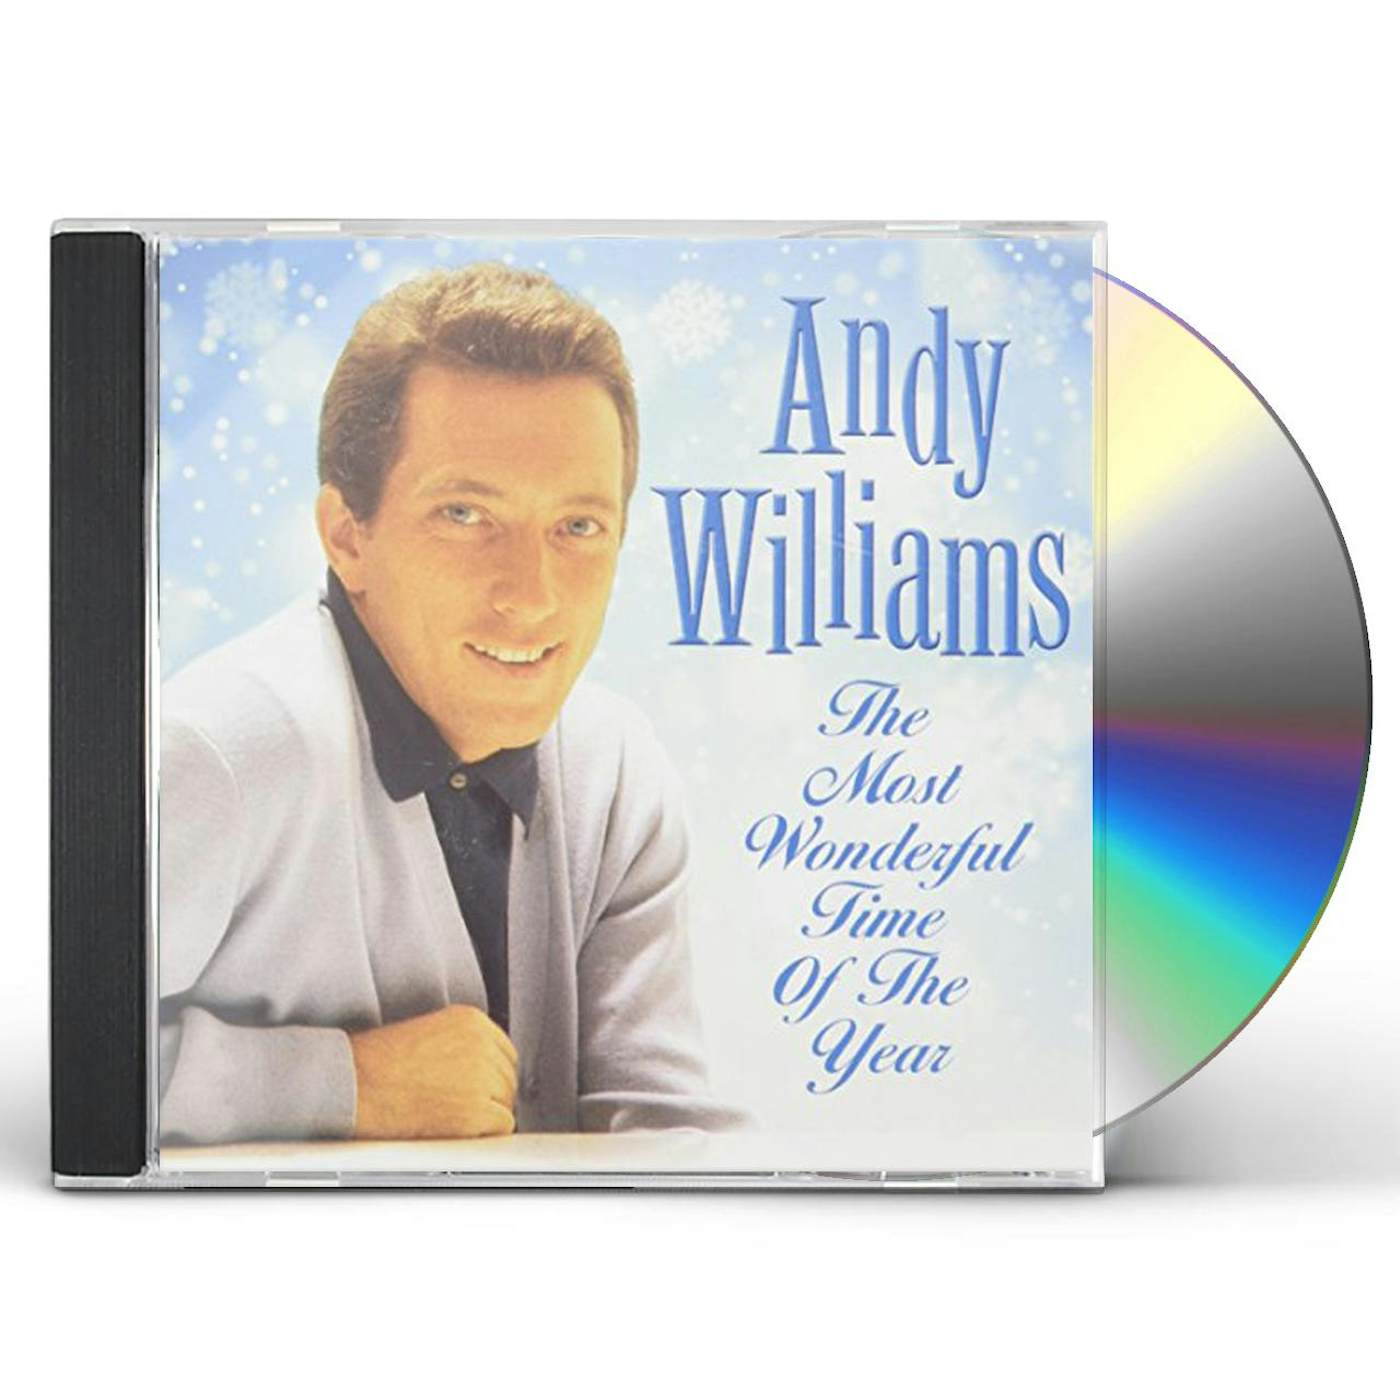 Andy Williams MOST WONDERFUL TIME OF THE YEAR CD